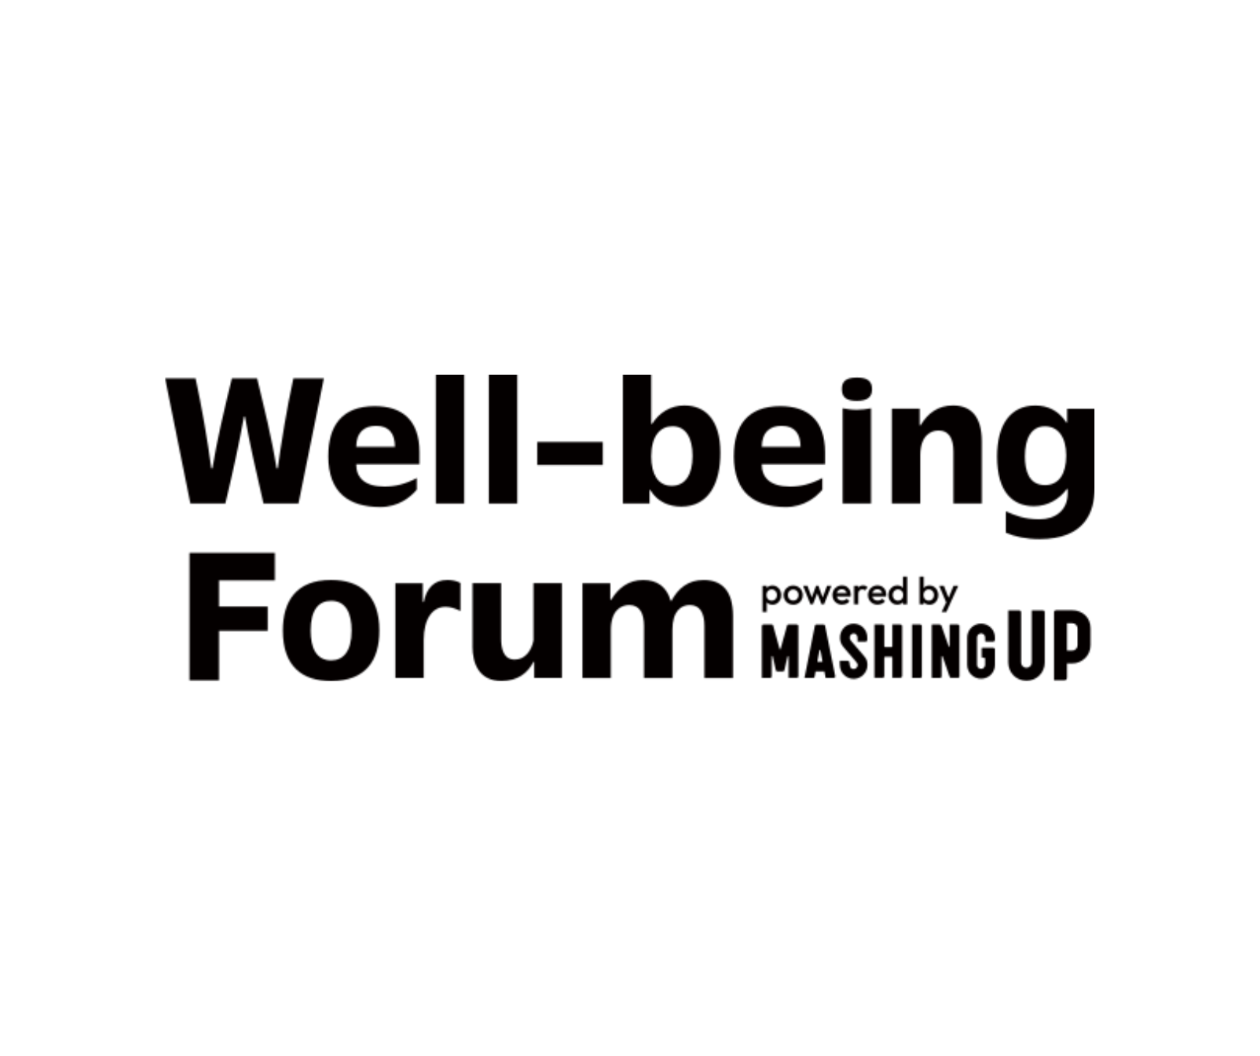 Well-being Forum